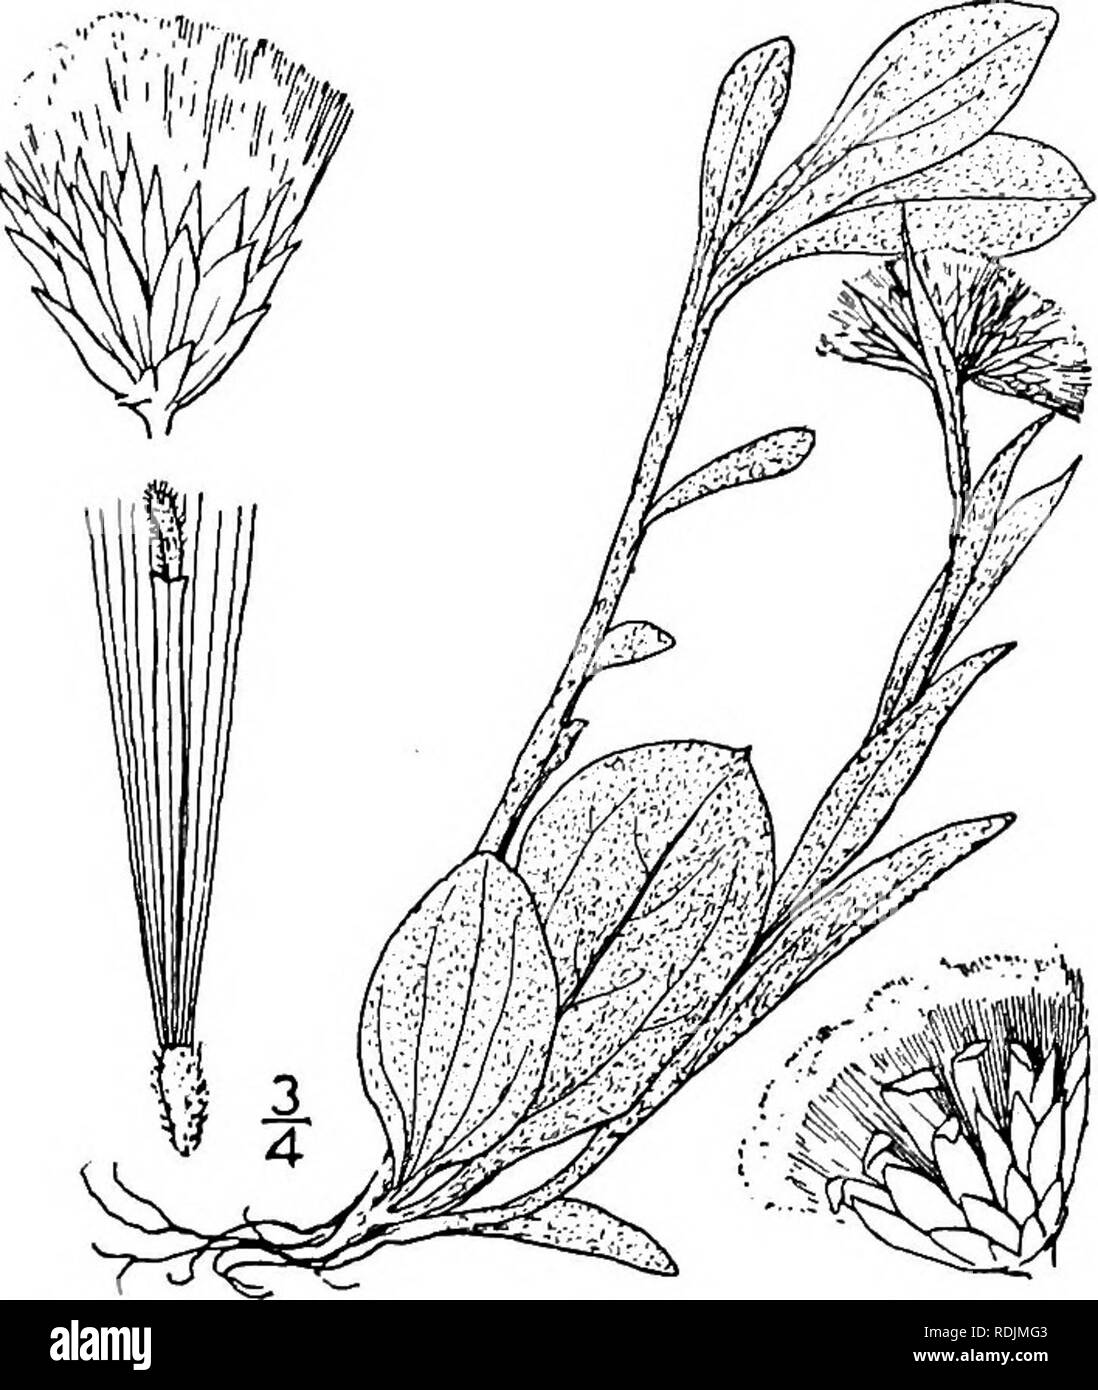 . An illustrated flora of the northern United States, Canada and the British possessions, from Newfoundland to the parallel of the southern boundary of Virginia, and from the Atlantic Ocean westward to the 102d meridian. Botany; Botany. Genus 43. THISTLE FAMILY. 451. 6. Antennaria plantaginifolia (L.) Richards. Plantain-leaf Everlasting. Fig. 4398. Gnaphalium plantaginifolium L. Sp. PI. 850. 1753. Antennaria plantaginifolia Richards. App. Frank. Journ. Ed. 2, 30. 1823. Floccose-woolly, stoloniferous, forming broad patches; flowering sterns of fertile plant 4'-2o' high, slender or stout, someti Stock Photo